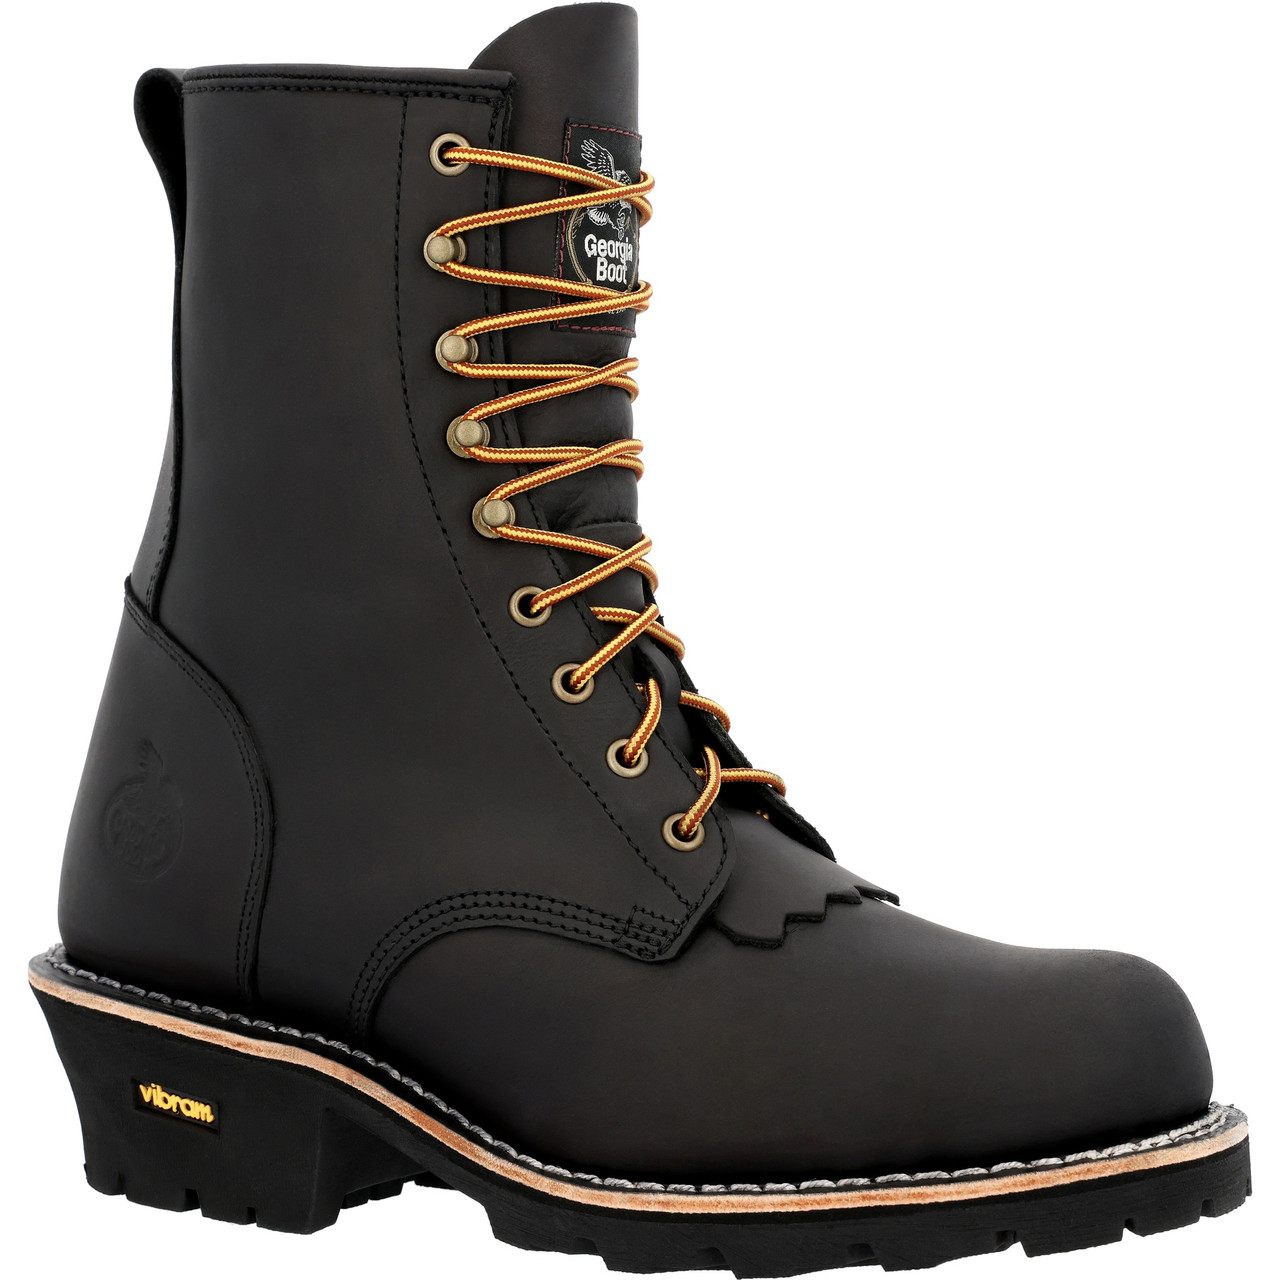 GEORGIA MEN'S FORESTRY LOGGER WORK BOOTS GB00648 